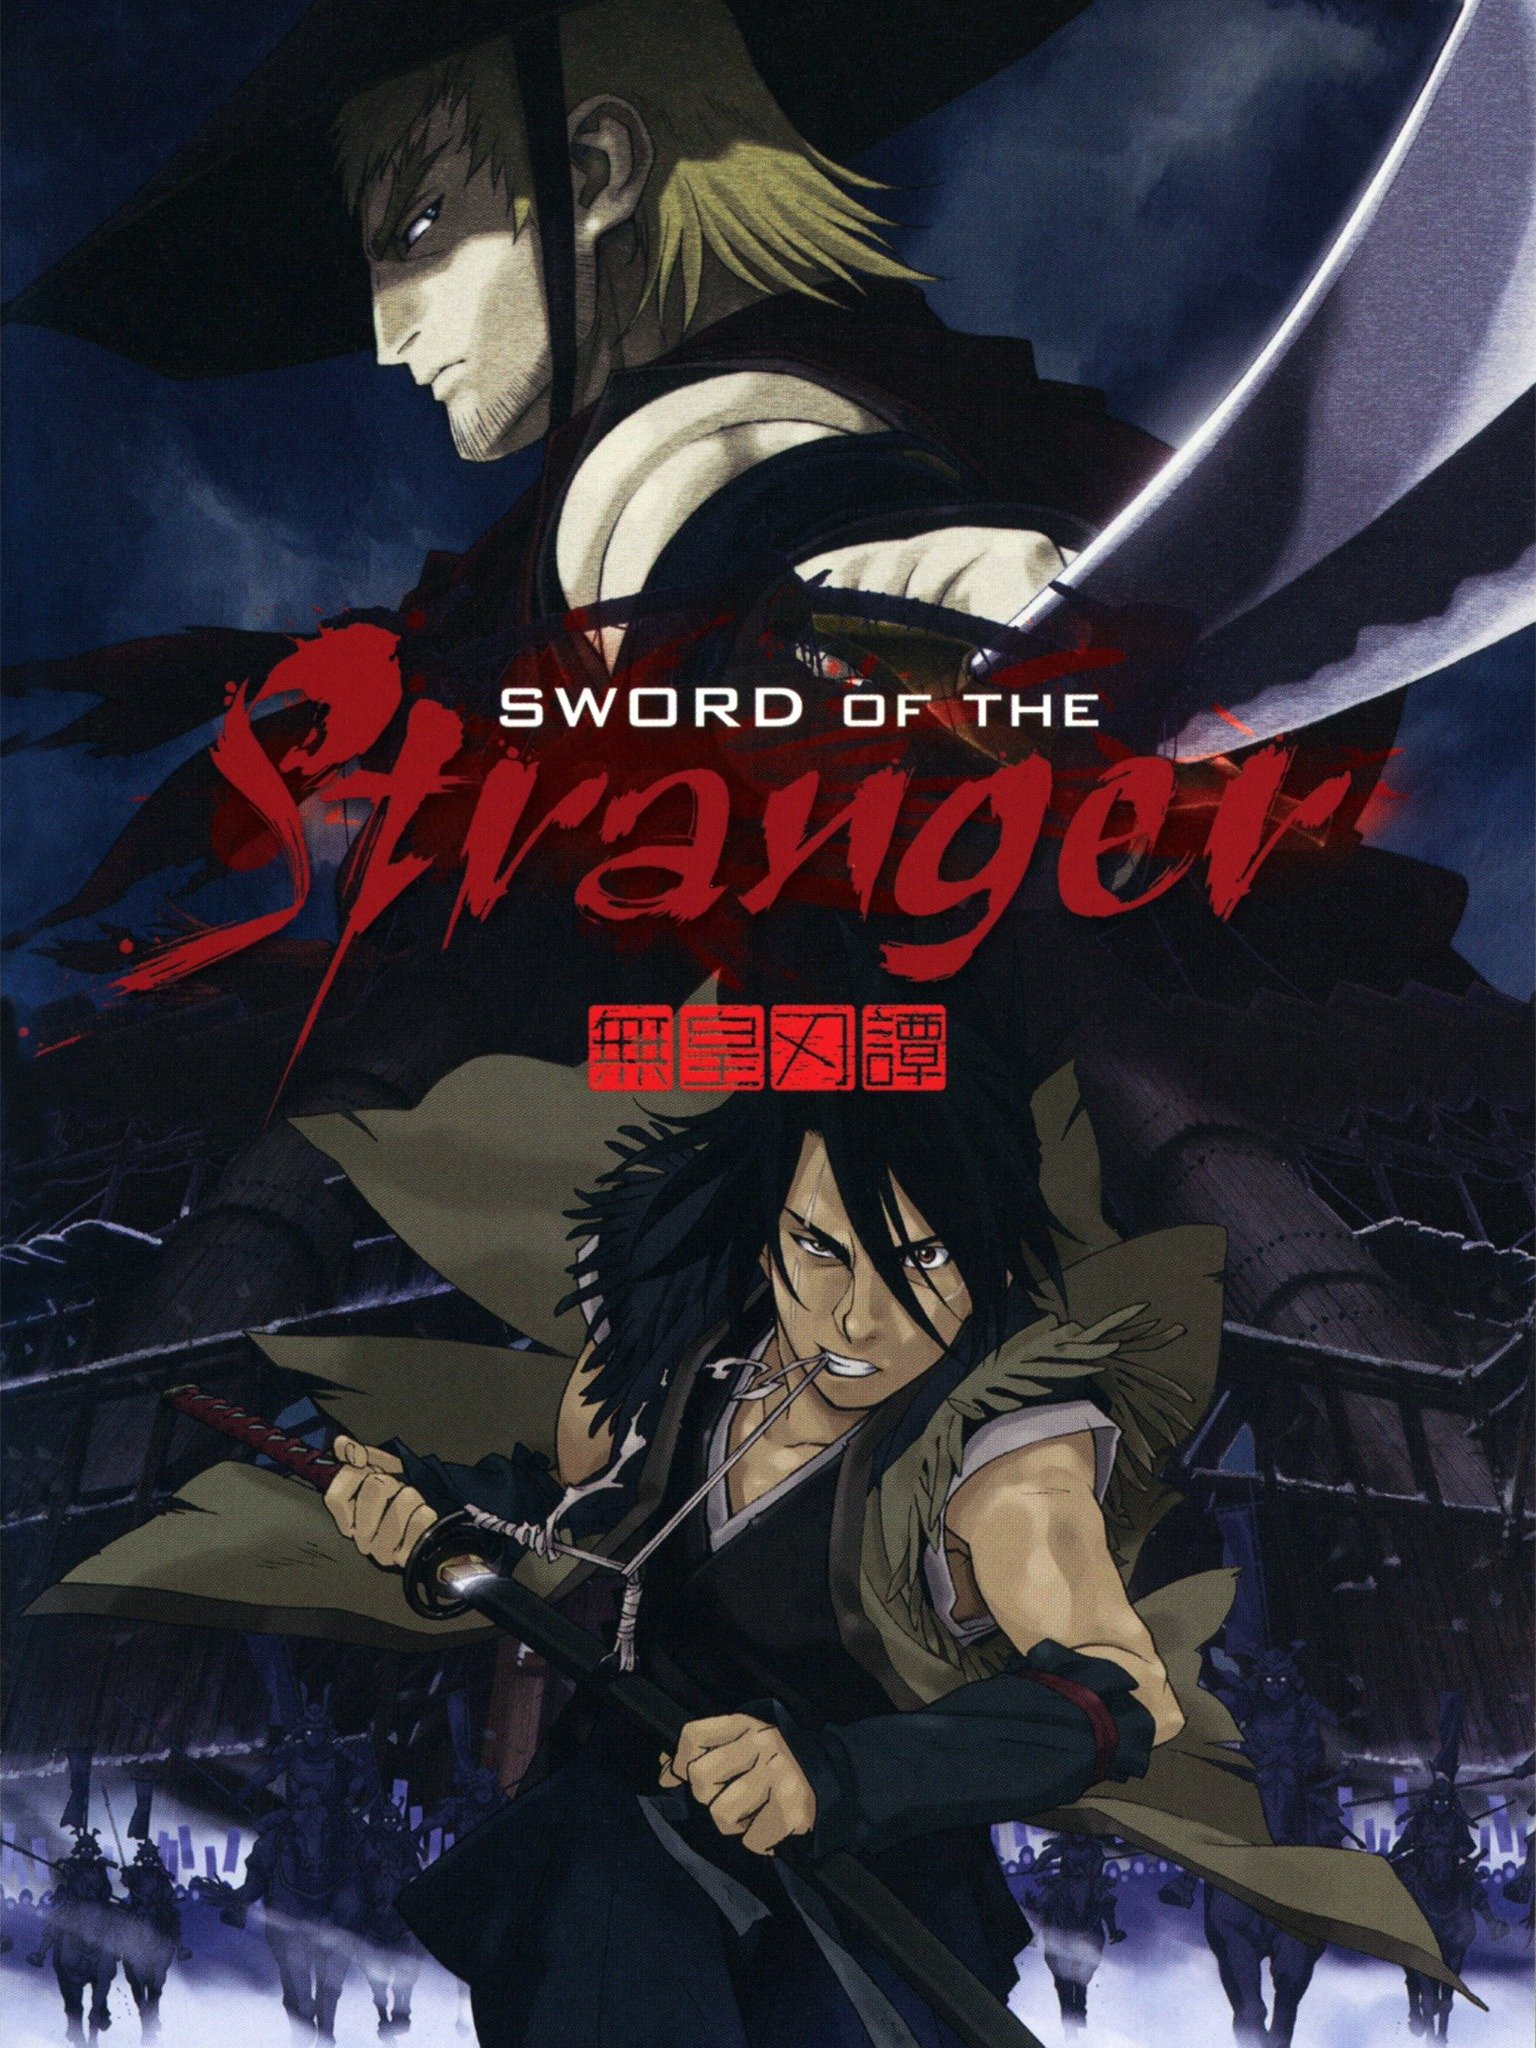 Sword of the Stranger - Where to Watch and Stream Online